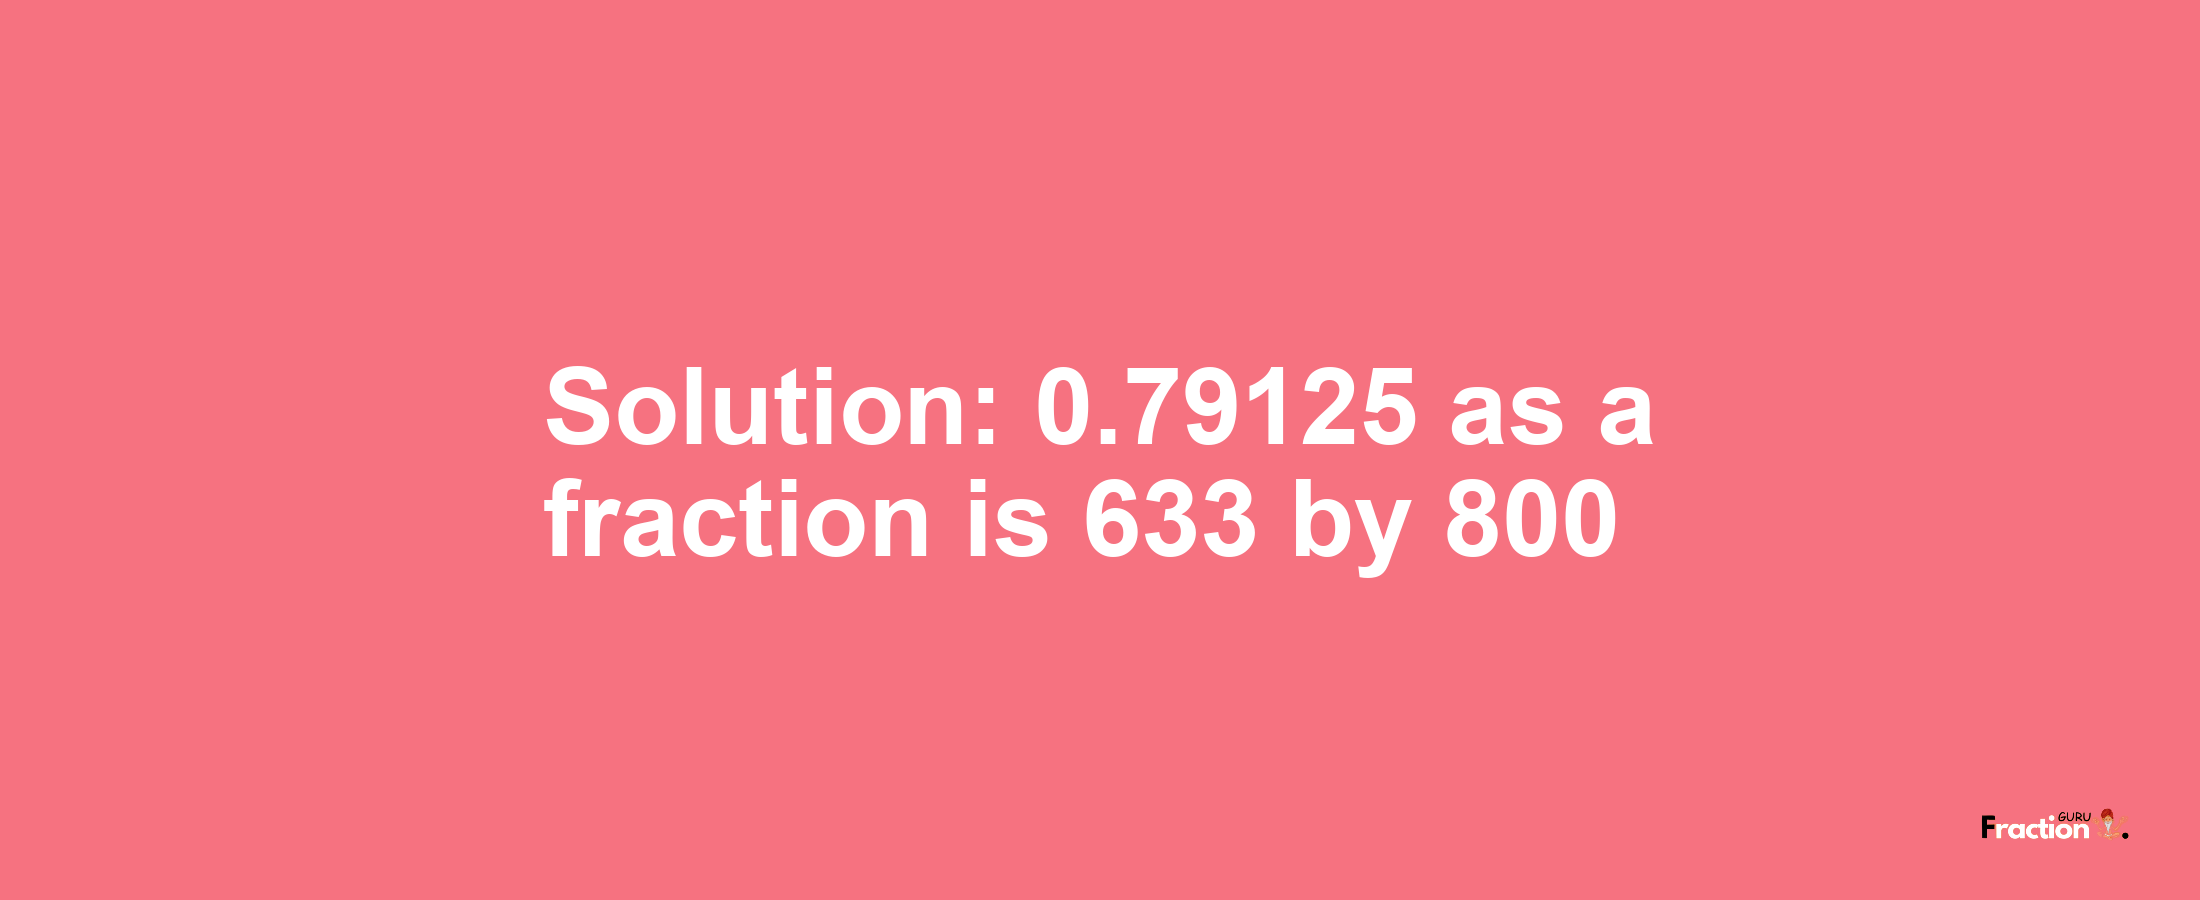 Solution:0.79125 as a fraction is 633/800